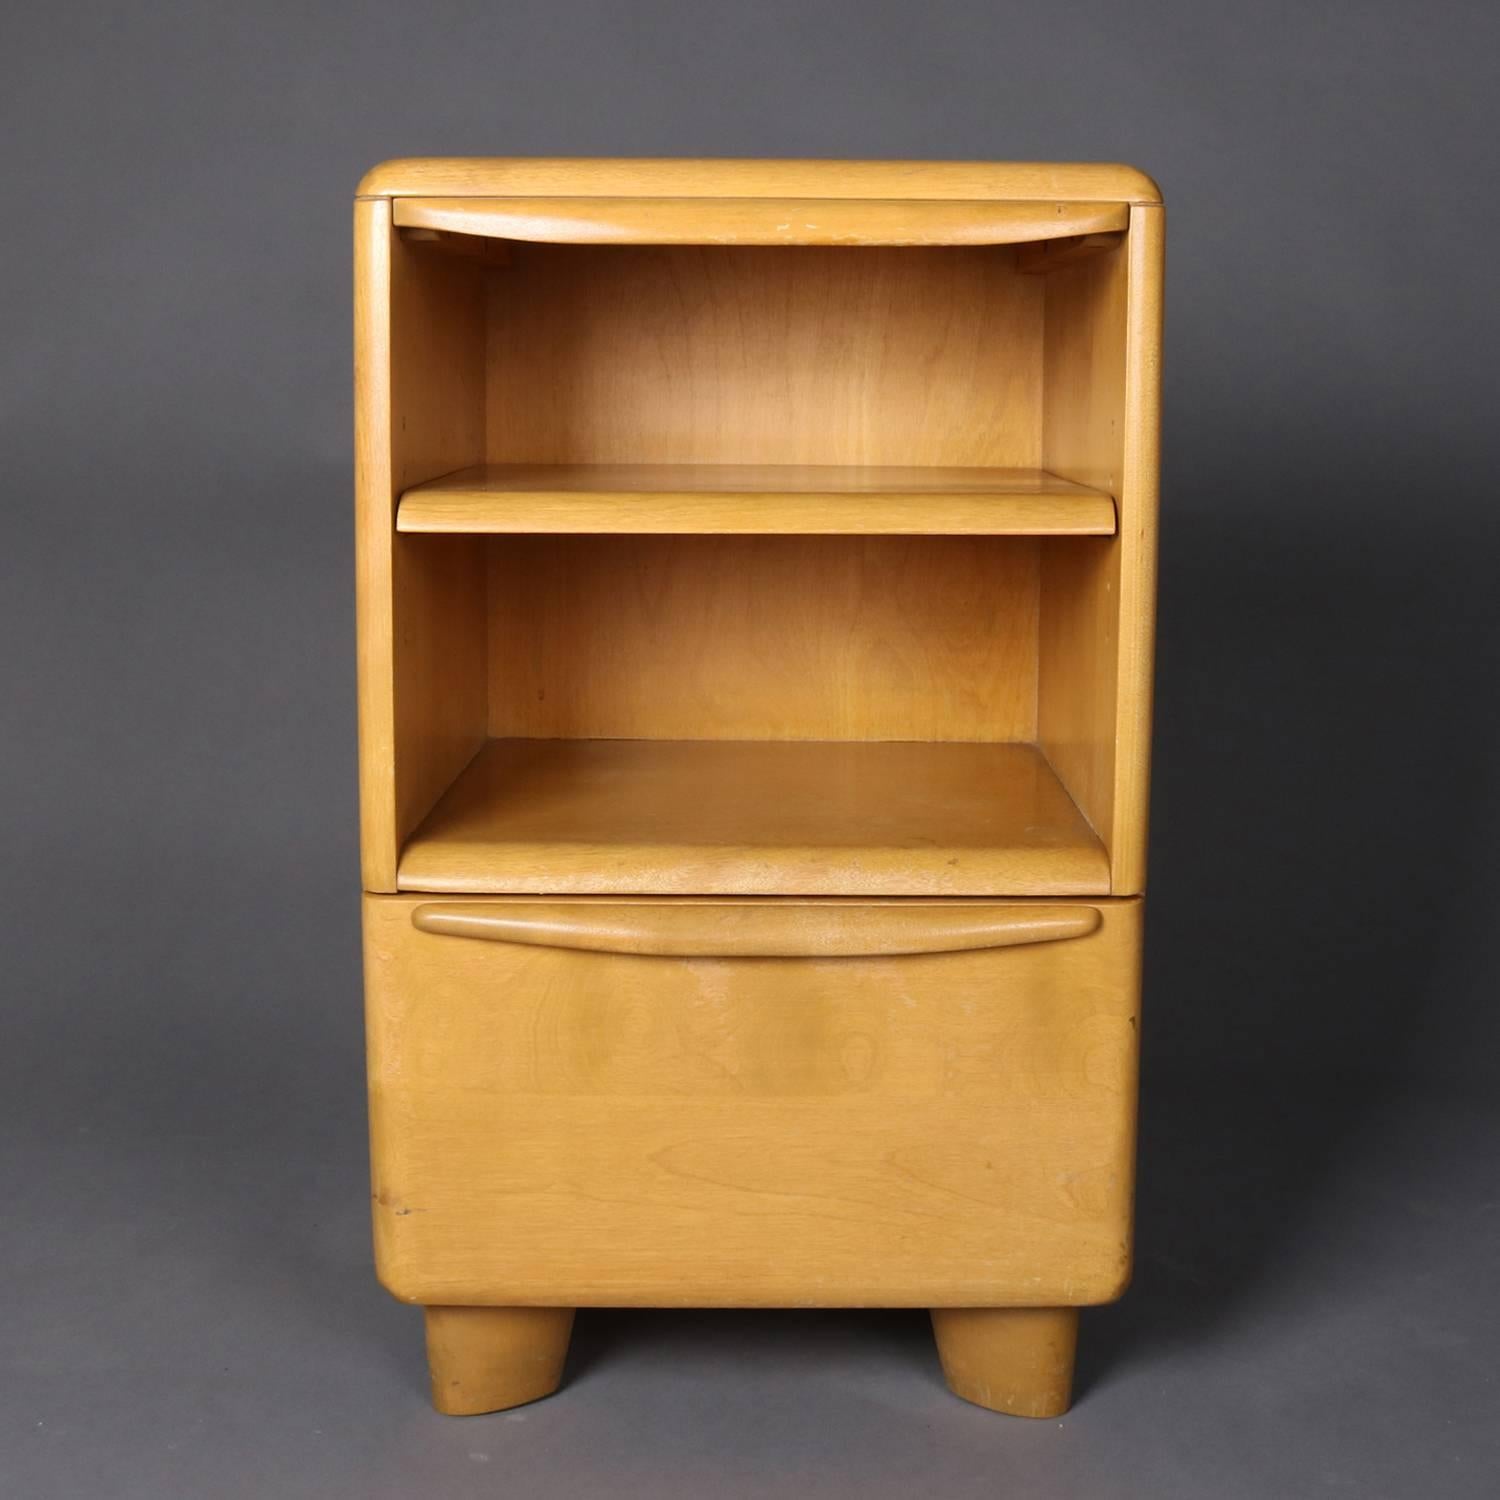 Mid-Century Modern end stand by Heywood Wakefield, encore in wheat, features yellow birch construction with shelving and lower drawer, 20th century

Measures: 25